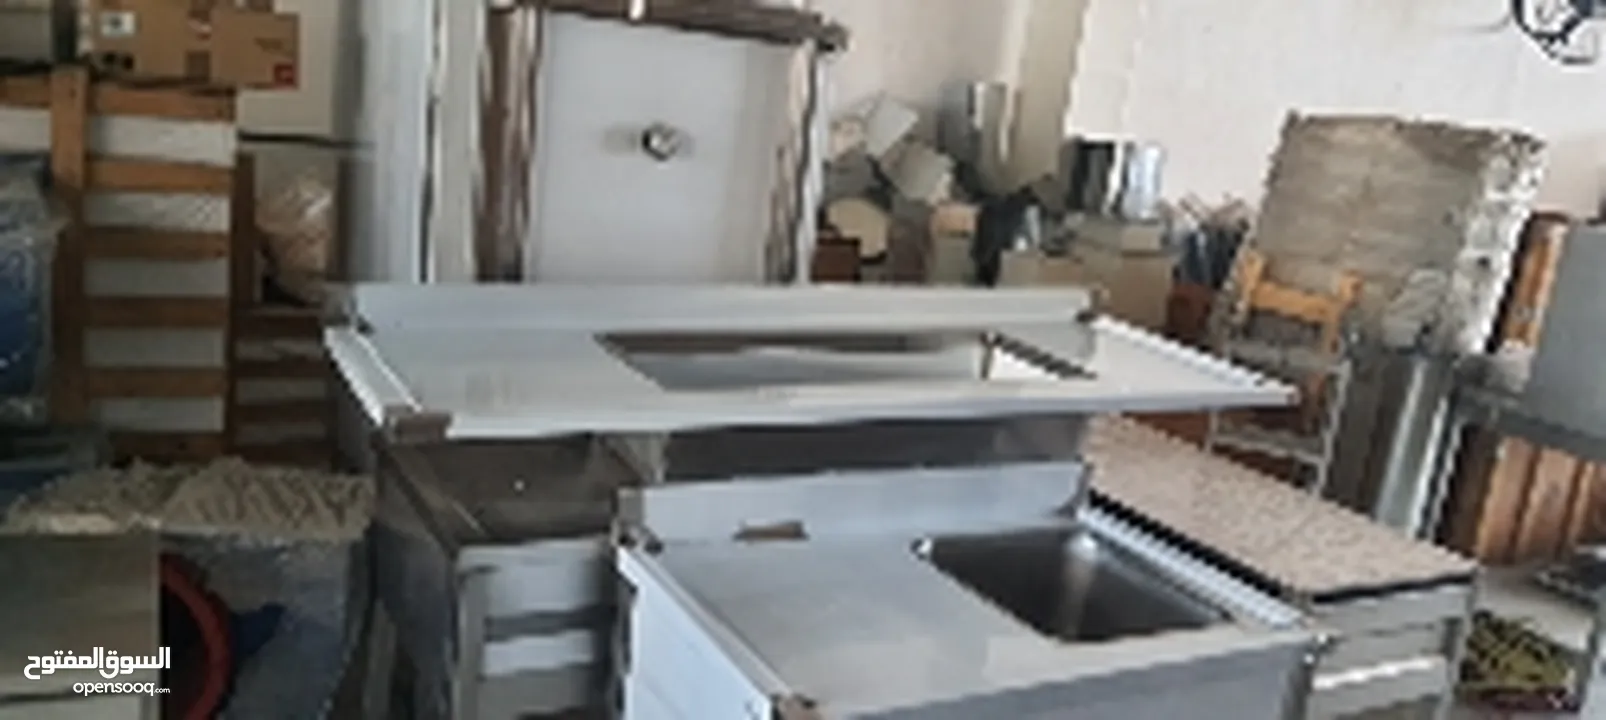 kitchen Equipment Salas and SS Fabrication   contact. no.